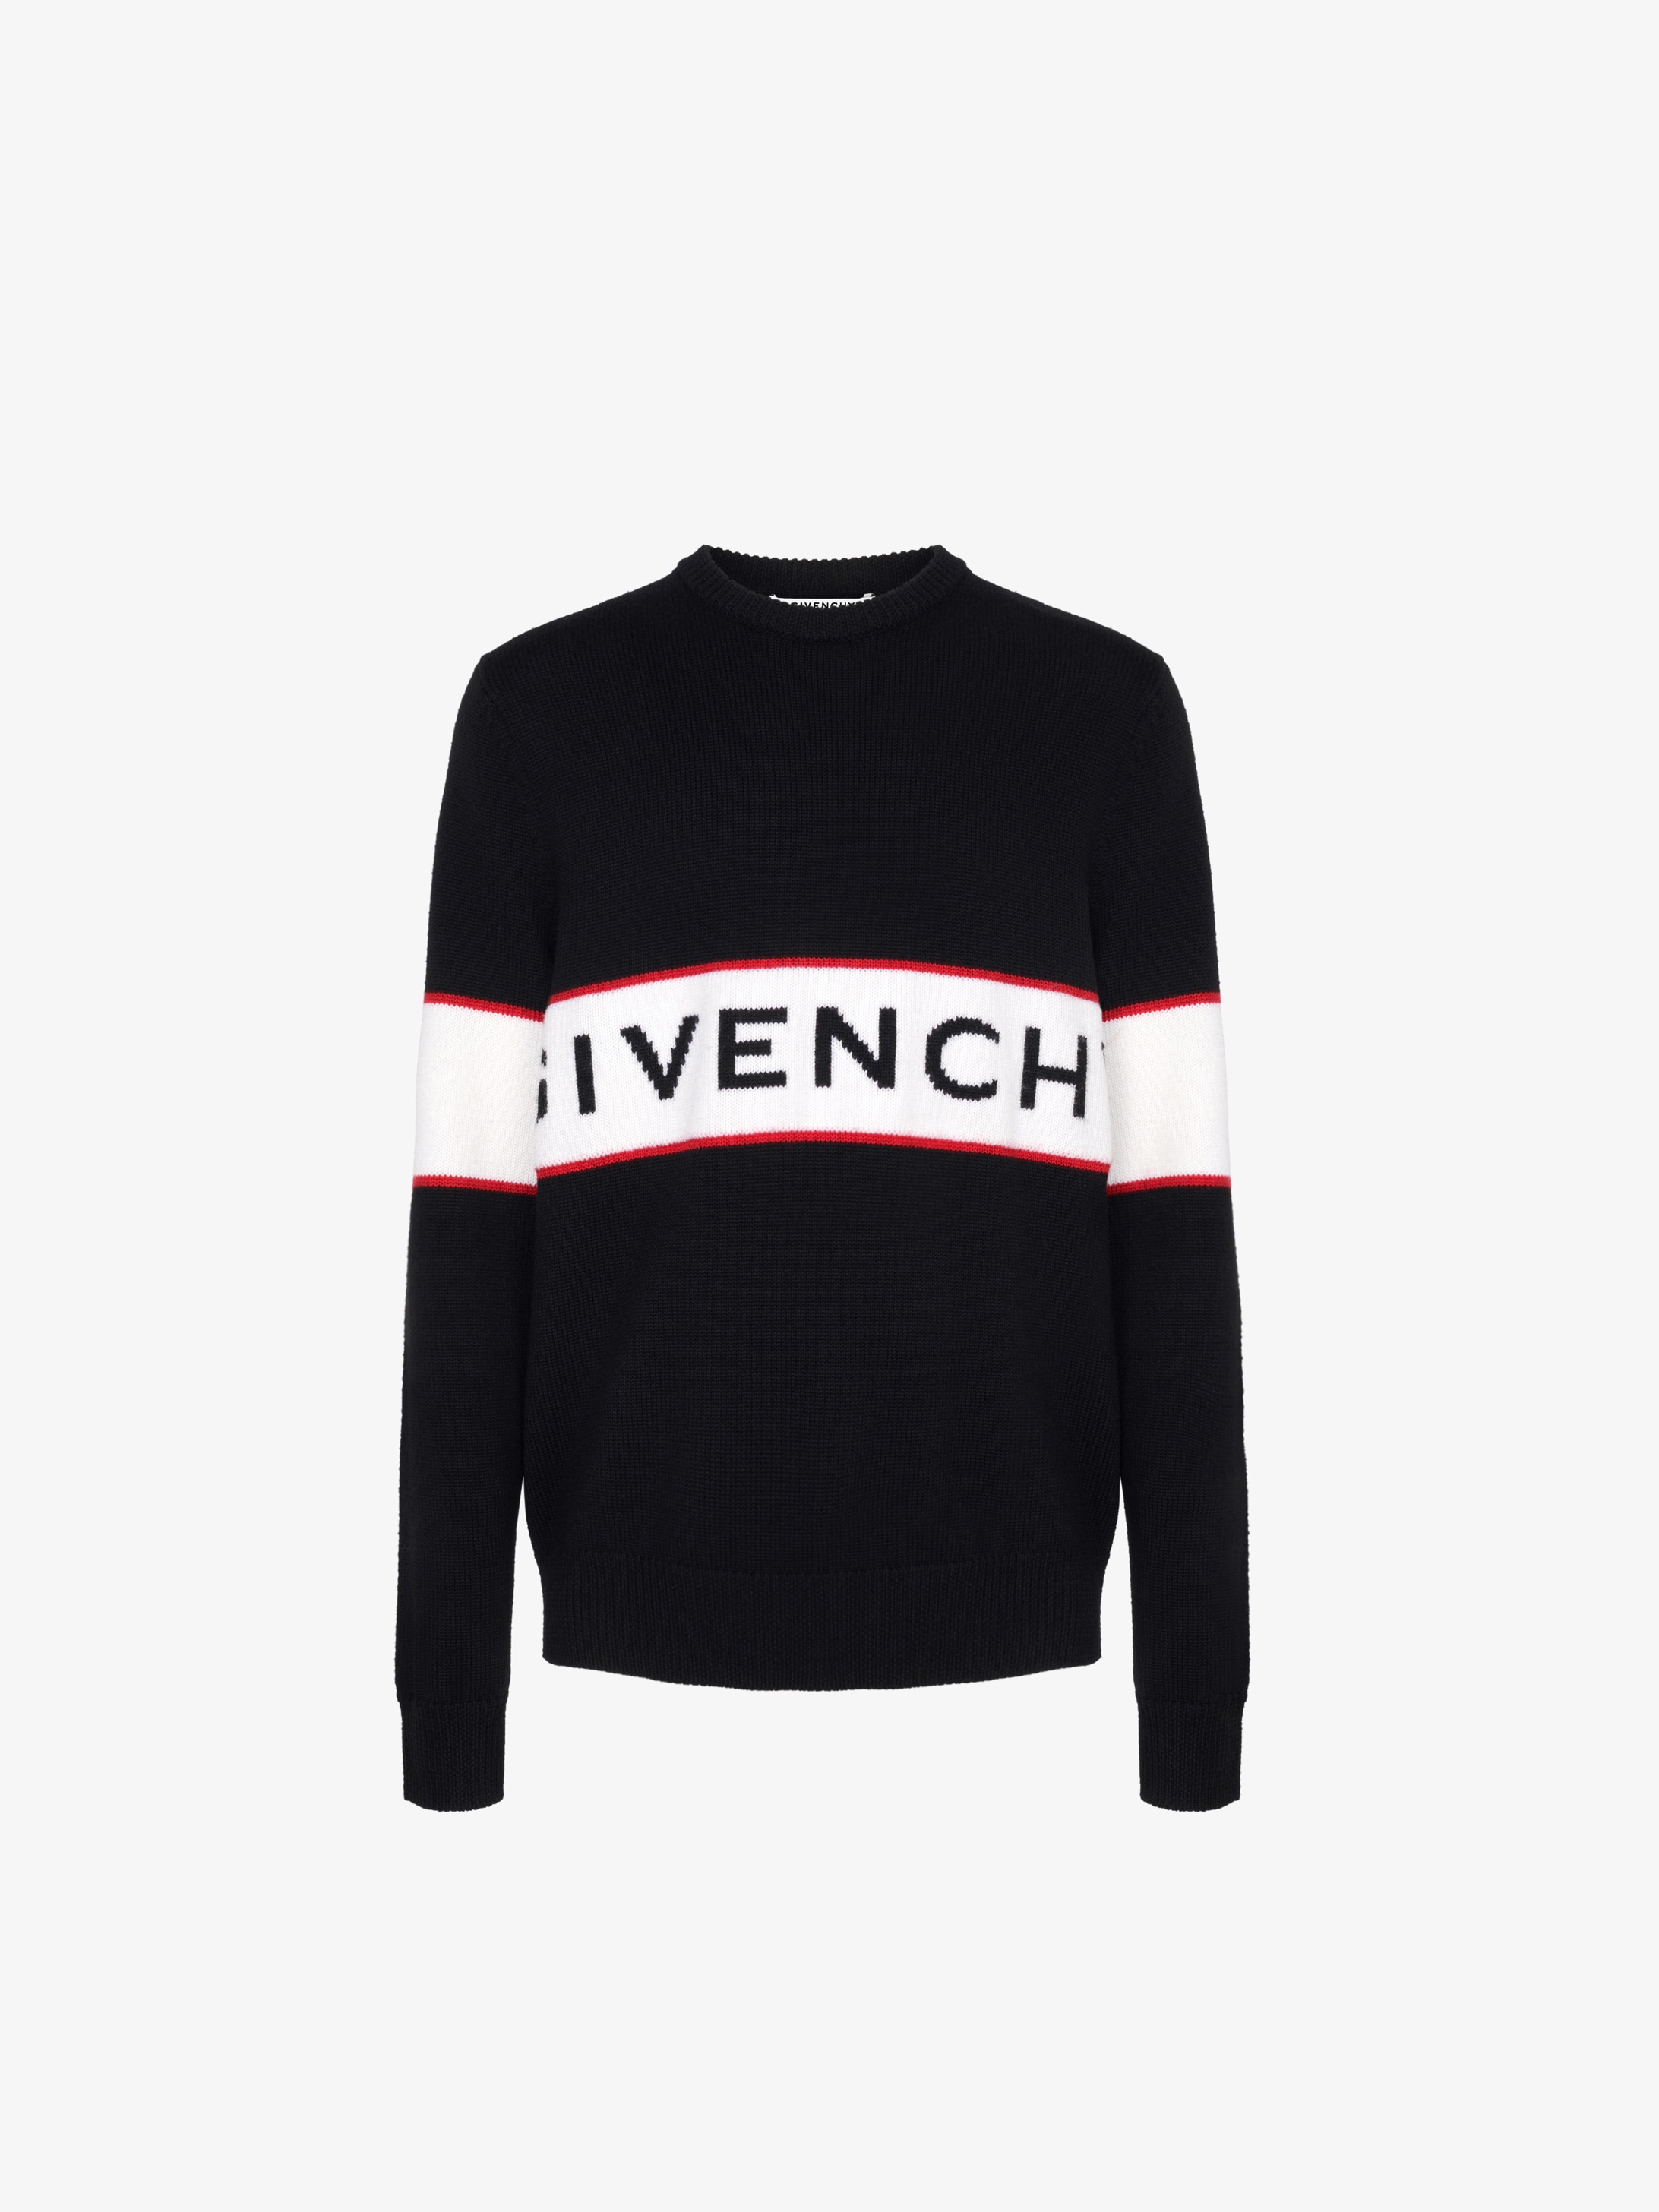 womens givenchy jumper